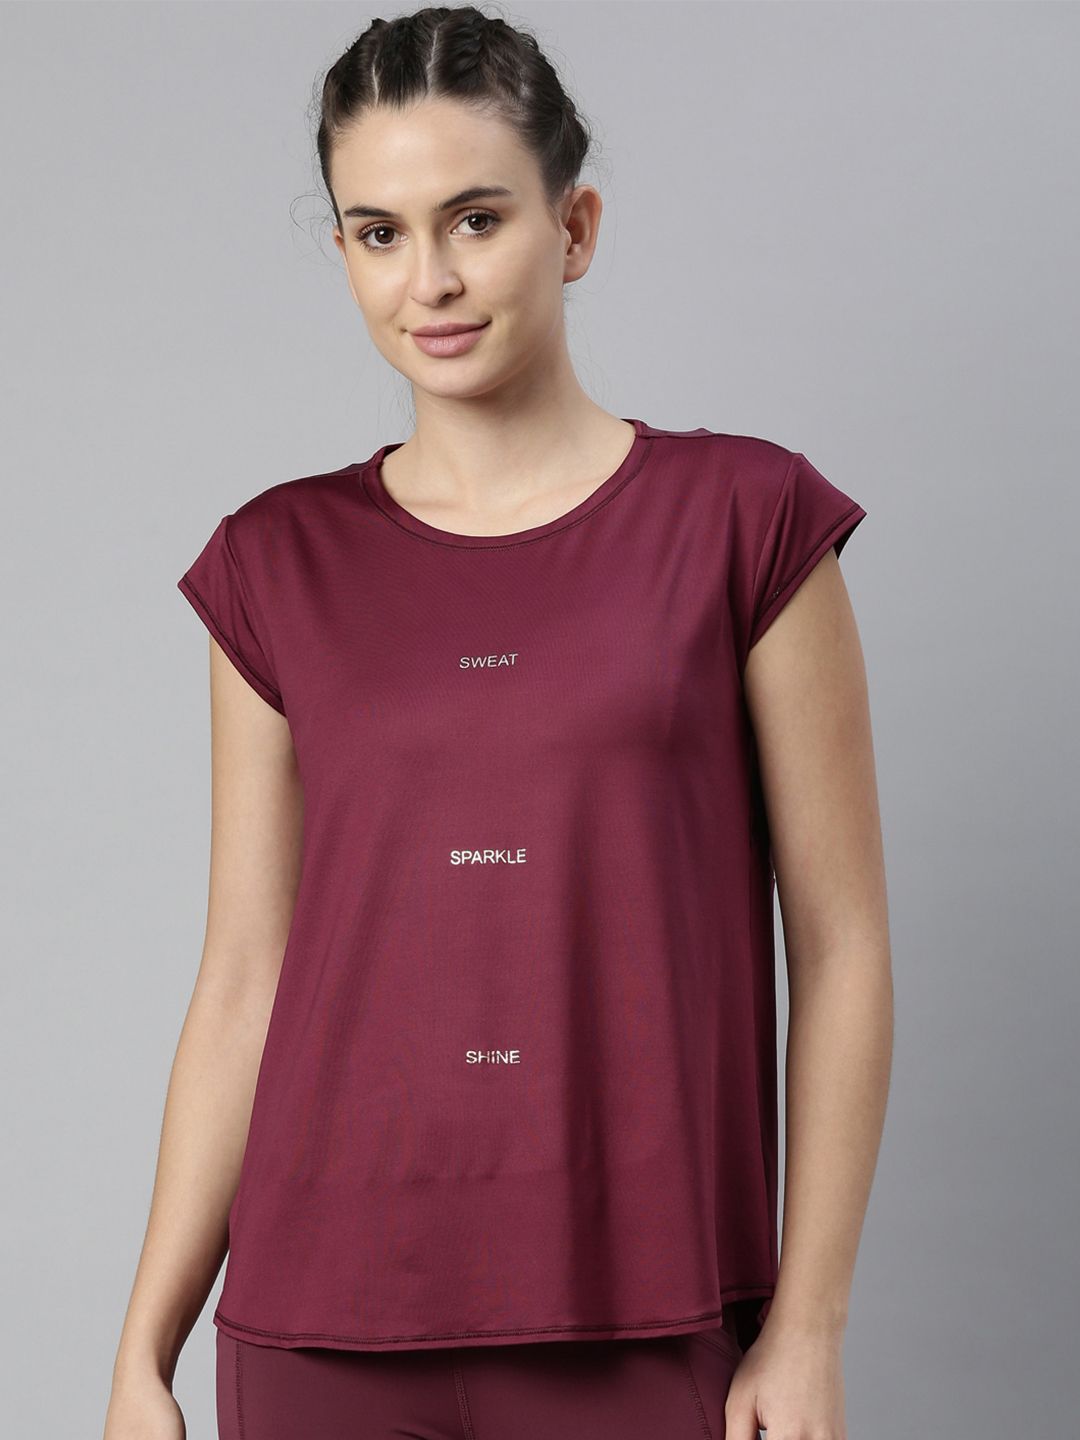 Enamor Women Maroon Typography Printed Antimicrobial Training or Gym T-shirt Price in India